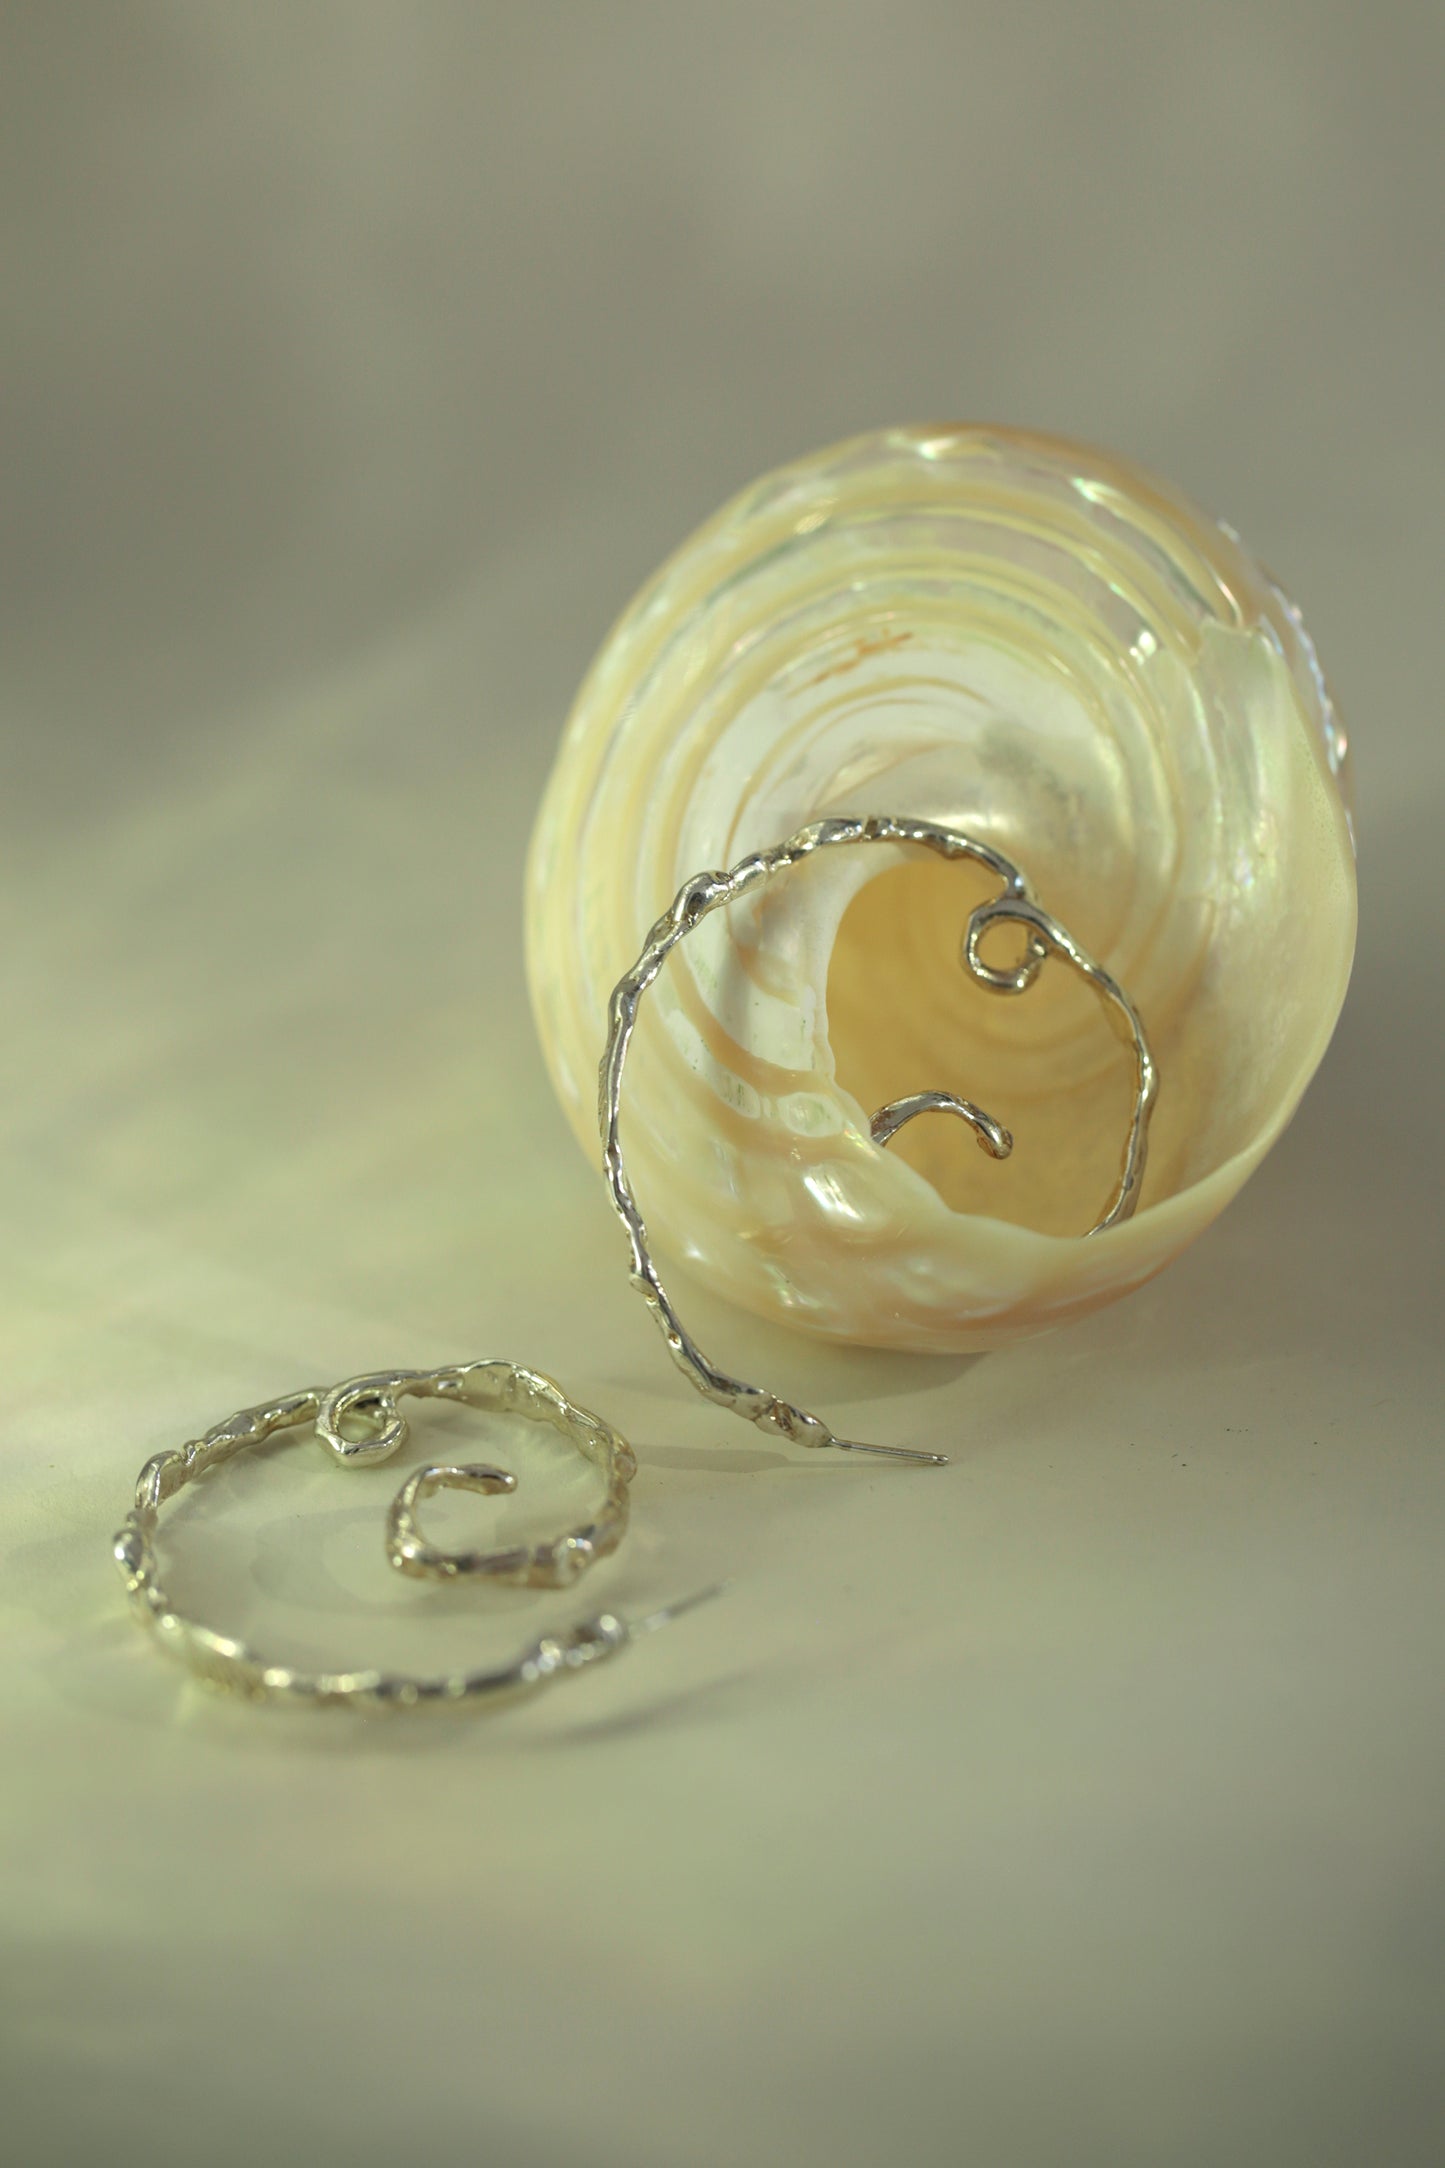 Product photo for CLARK Andromeda Earrings. An underwater mood, two spiraling hoop earrings are photographed. One flat against the ground and another nested in a shell. The earrings are Sterling Silver, at the bottom there is a loop. This unique hoop earring is a spiraling shape.